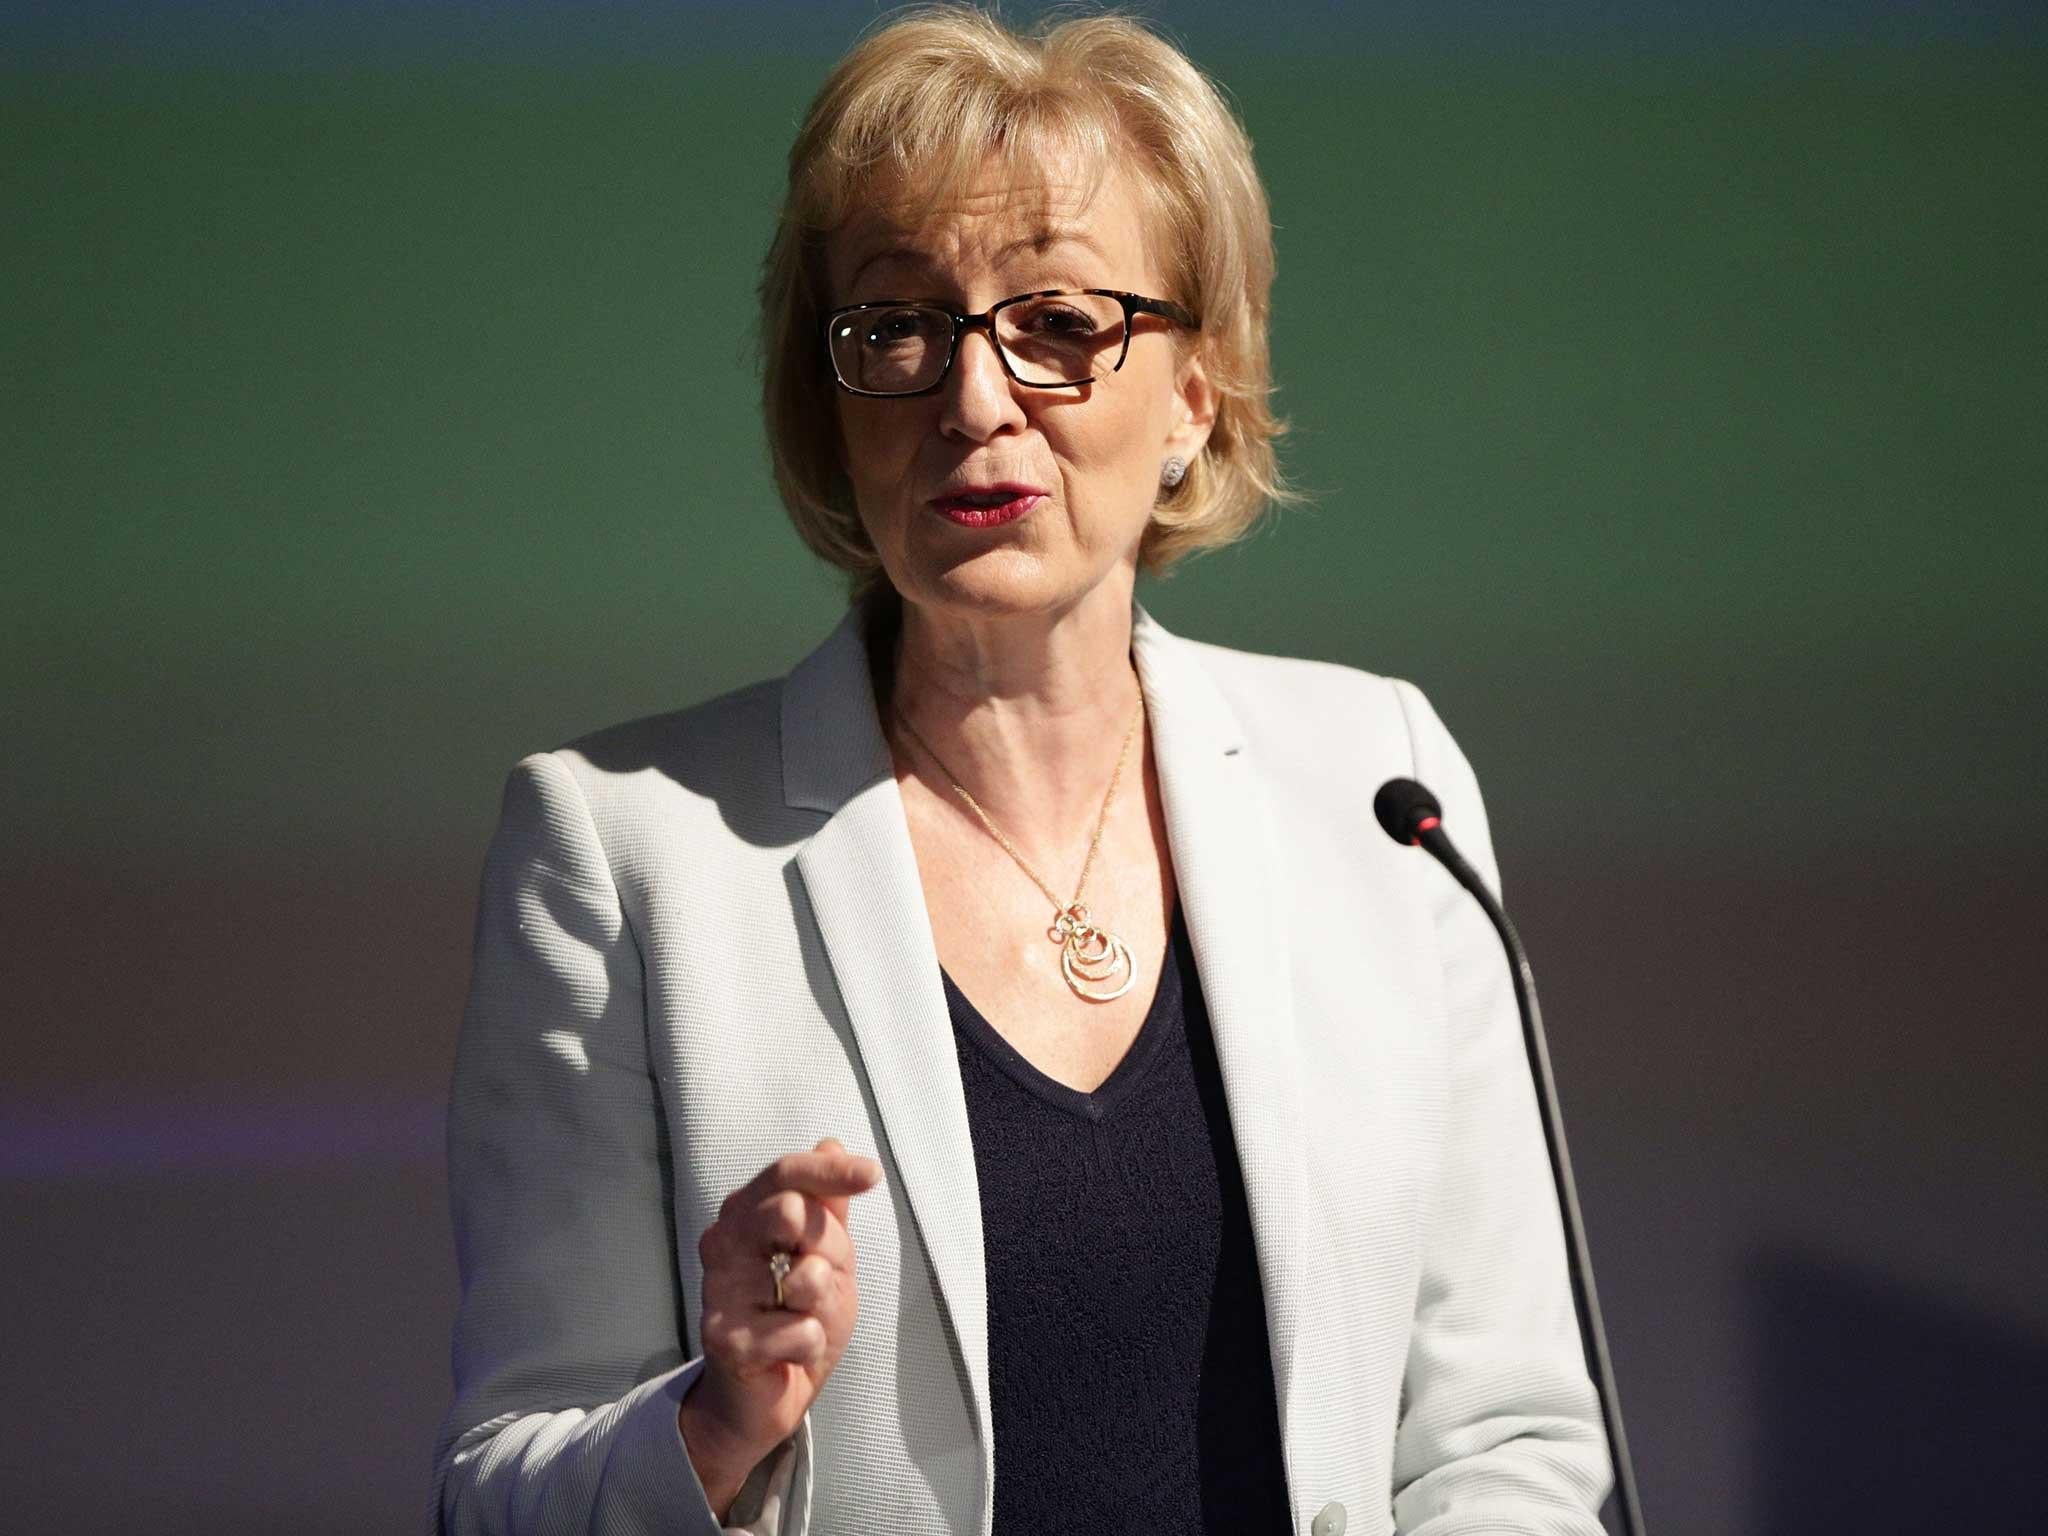 Conservative leadership contender Andrea Leadsom gives a speech on the economy at Millbank Tower